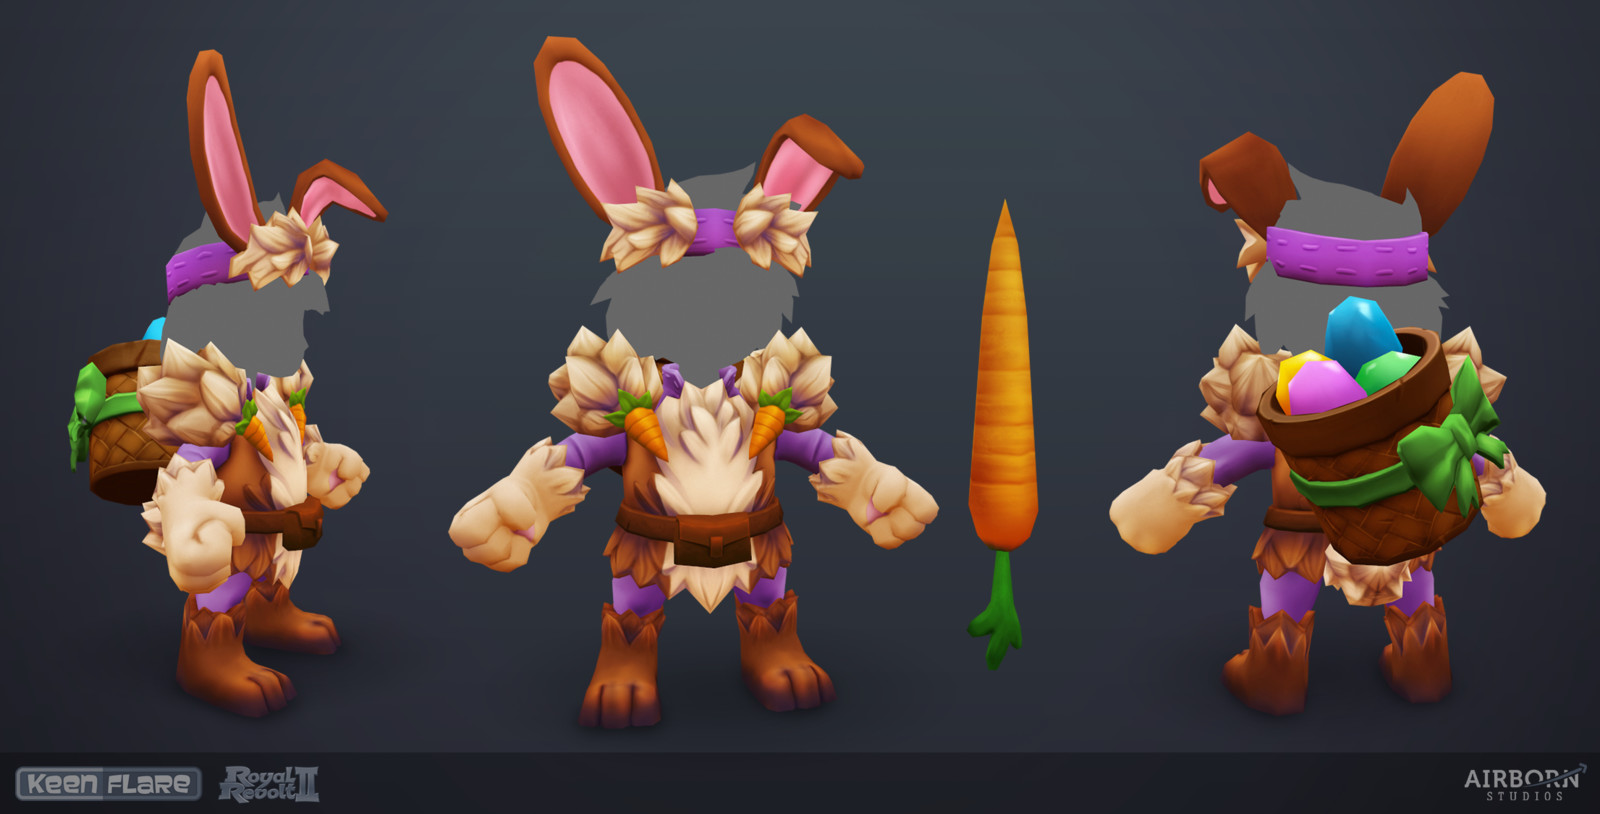 Royal Revolt 2: Bunny Set low-poly model and texture by Alexandra Graap